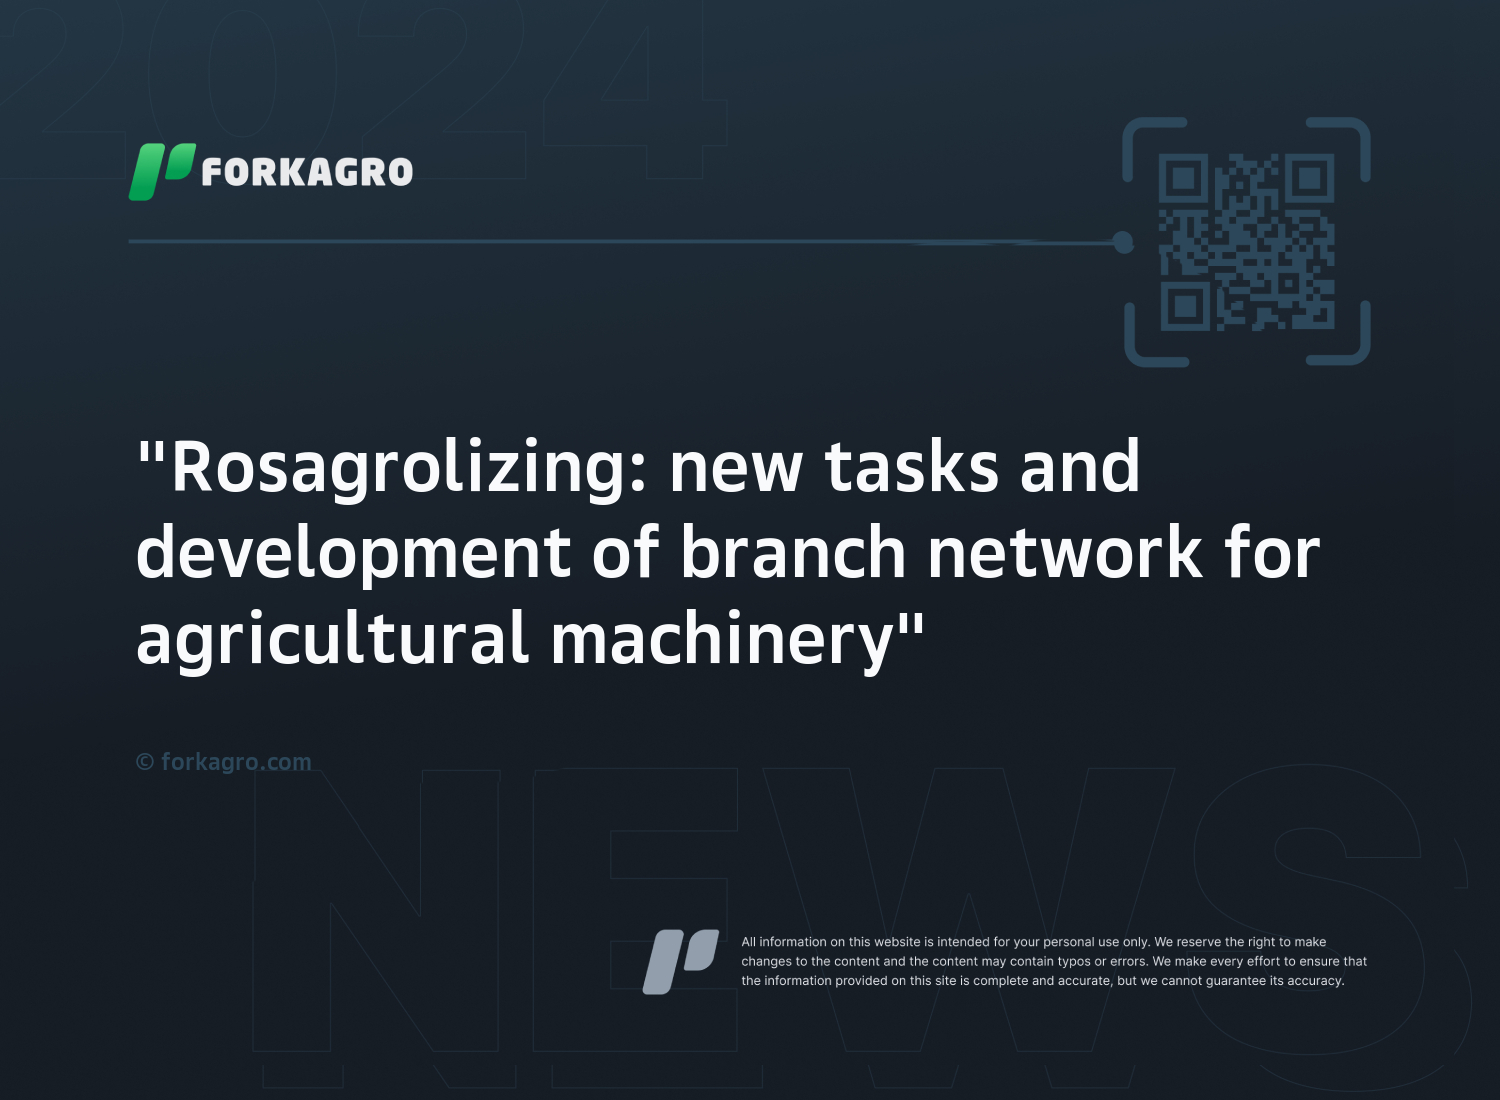 "Rosagrolizing: new tasks and development of branch network for agricultural machinery"